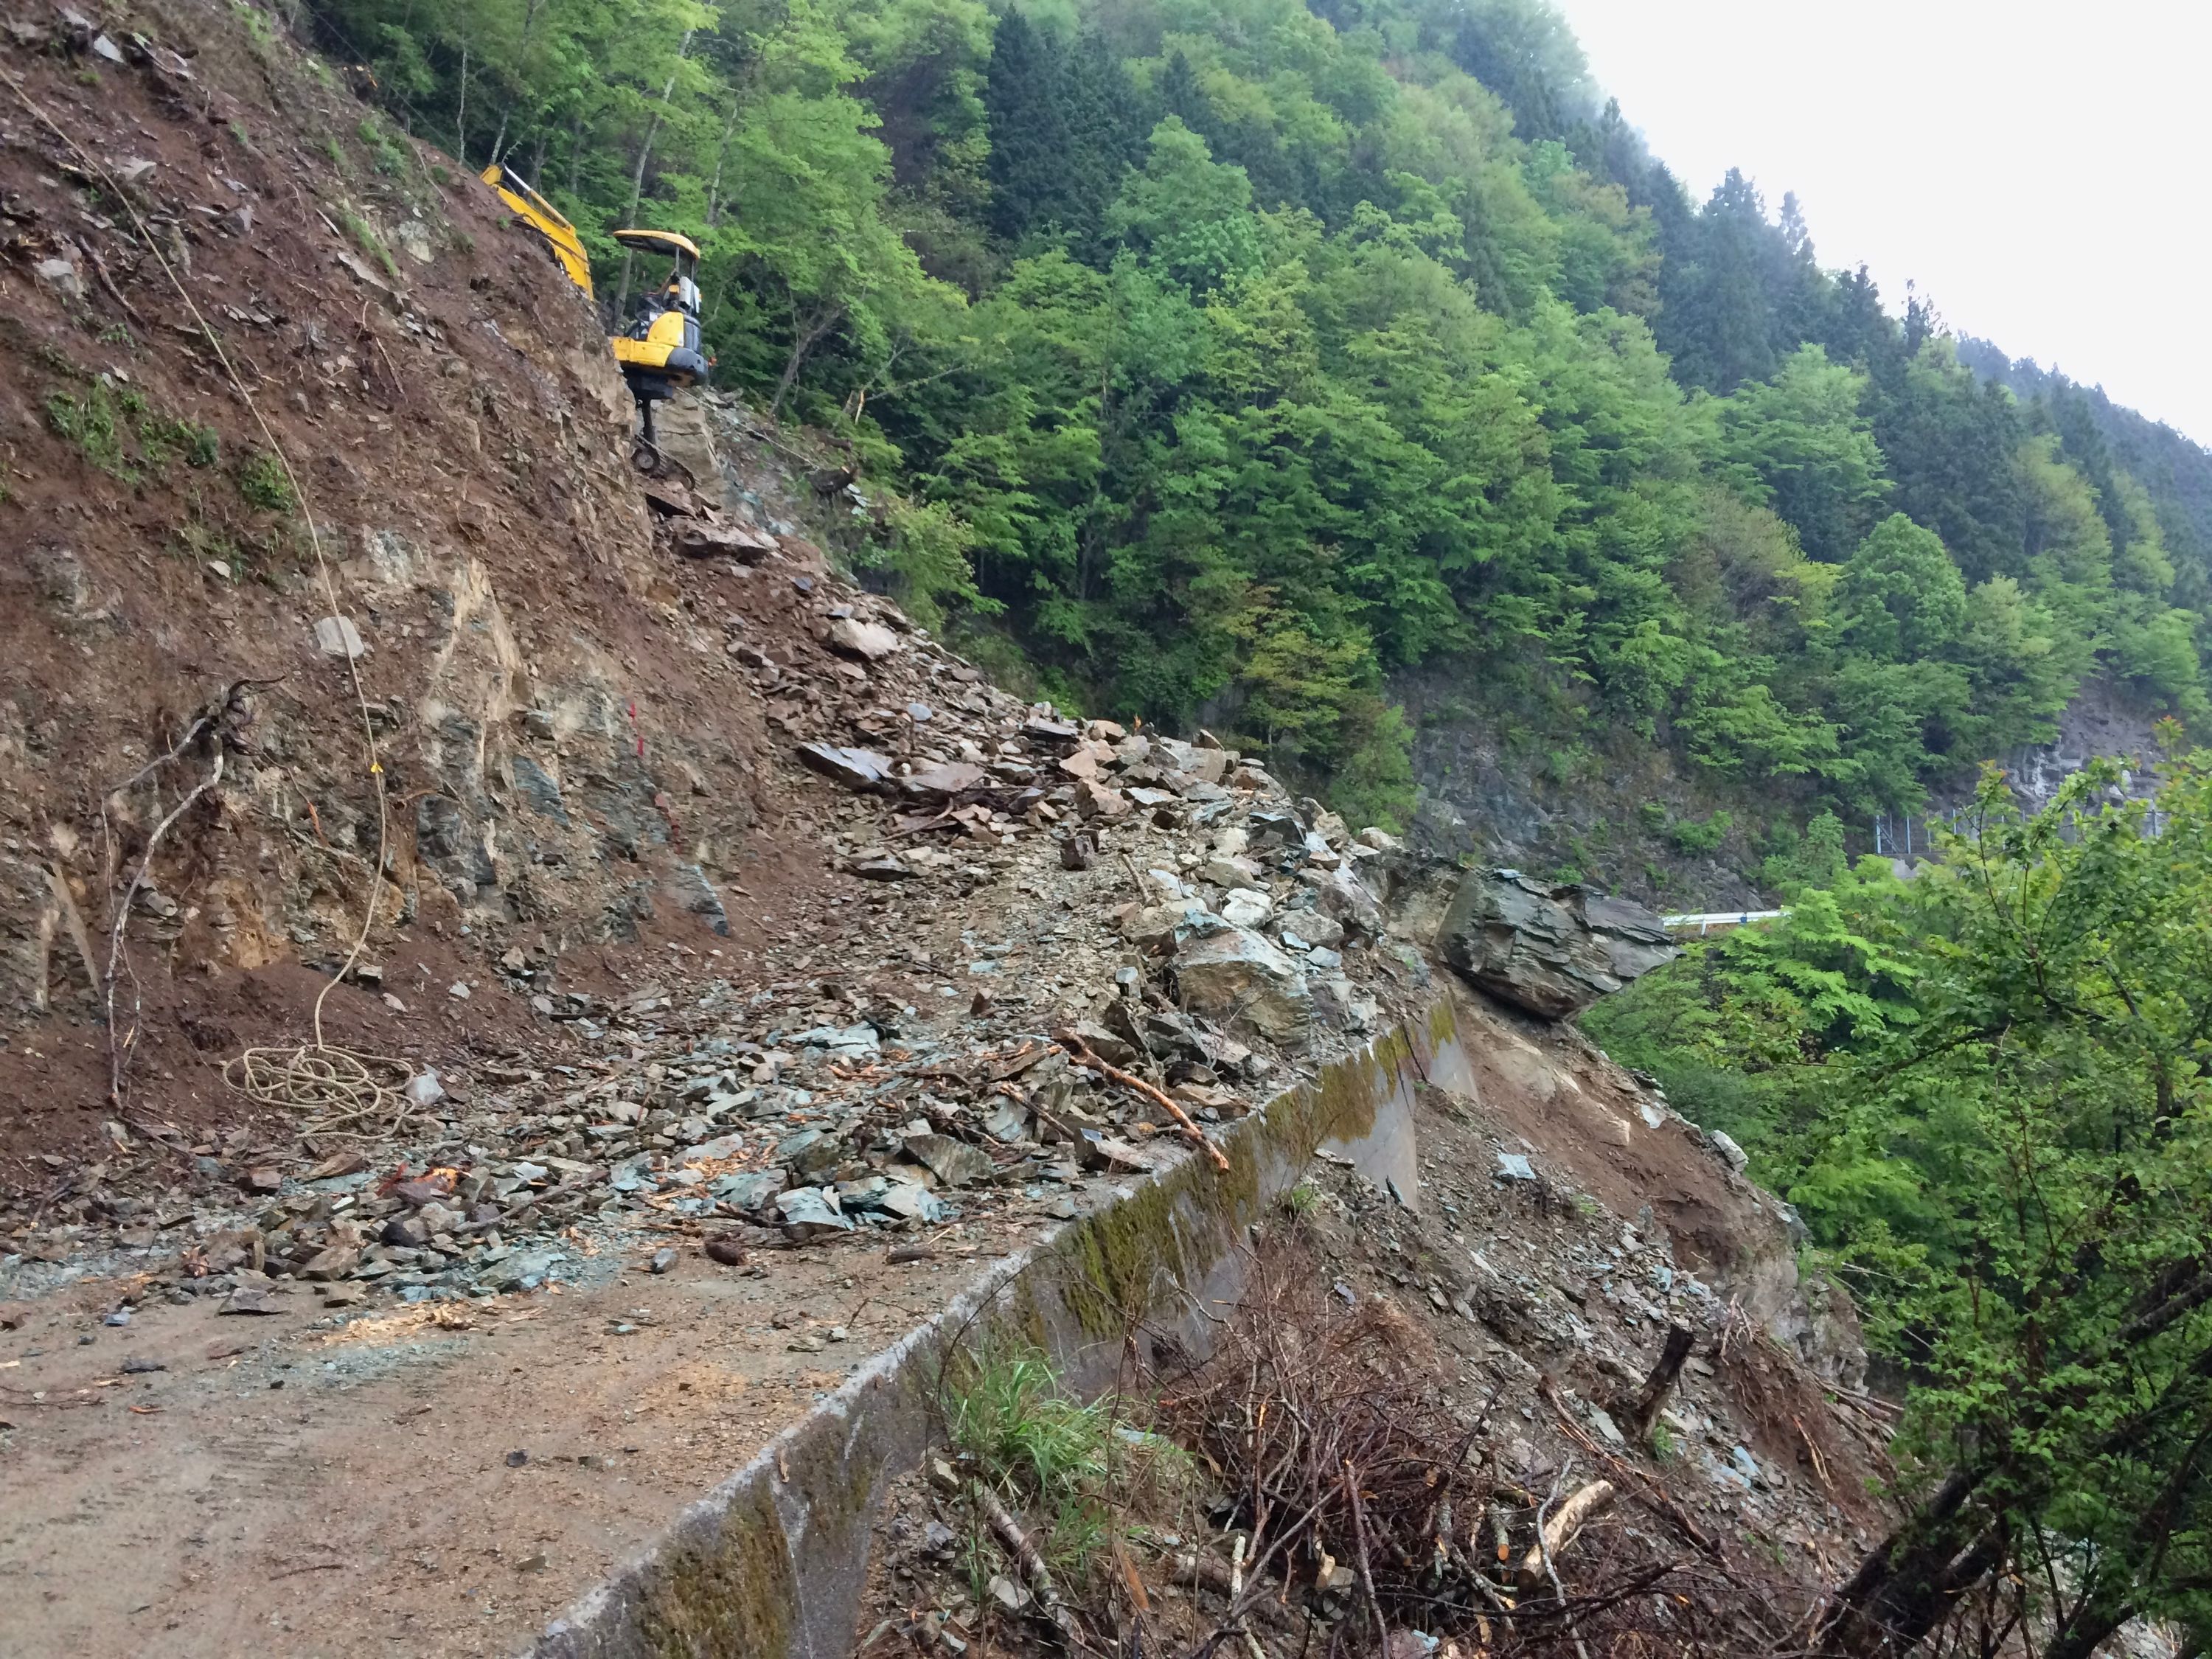 A mountain road completely covered by rocks from a landslide, making it impassable to vehicular traffic. A very small yellow excavator is parked on the rocks.